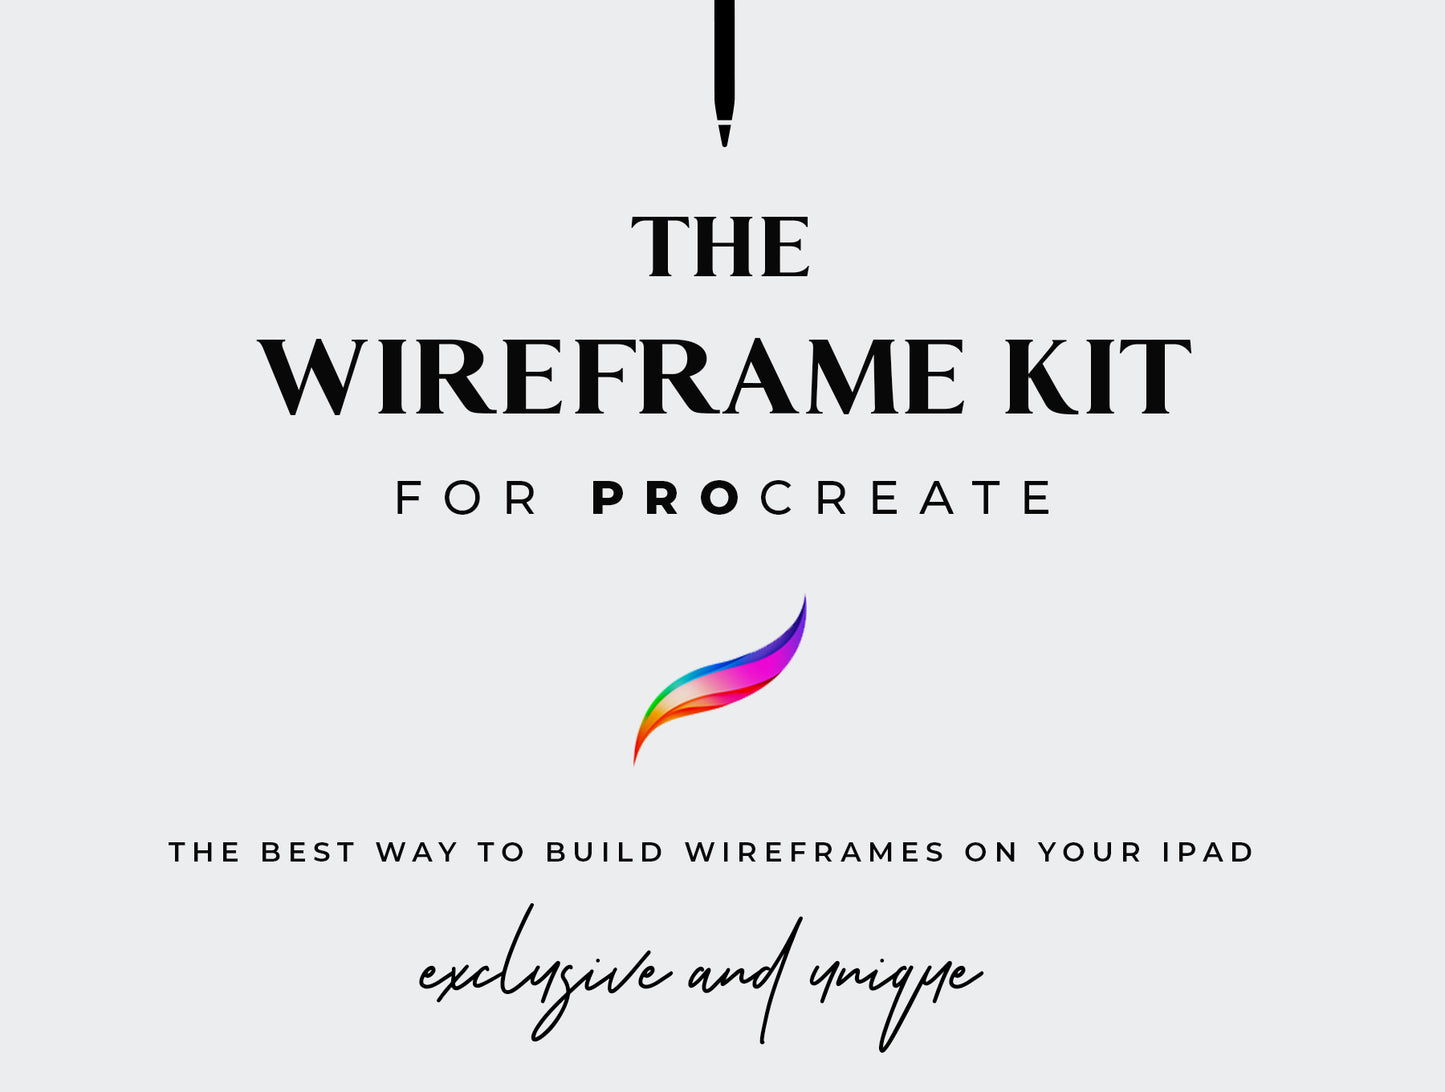 The Wireframe Kit for Procreate